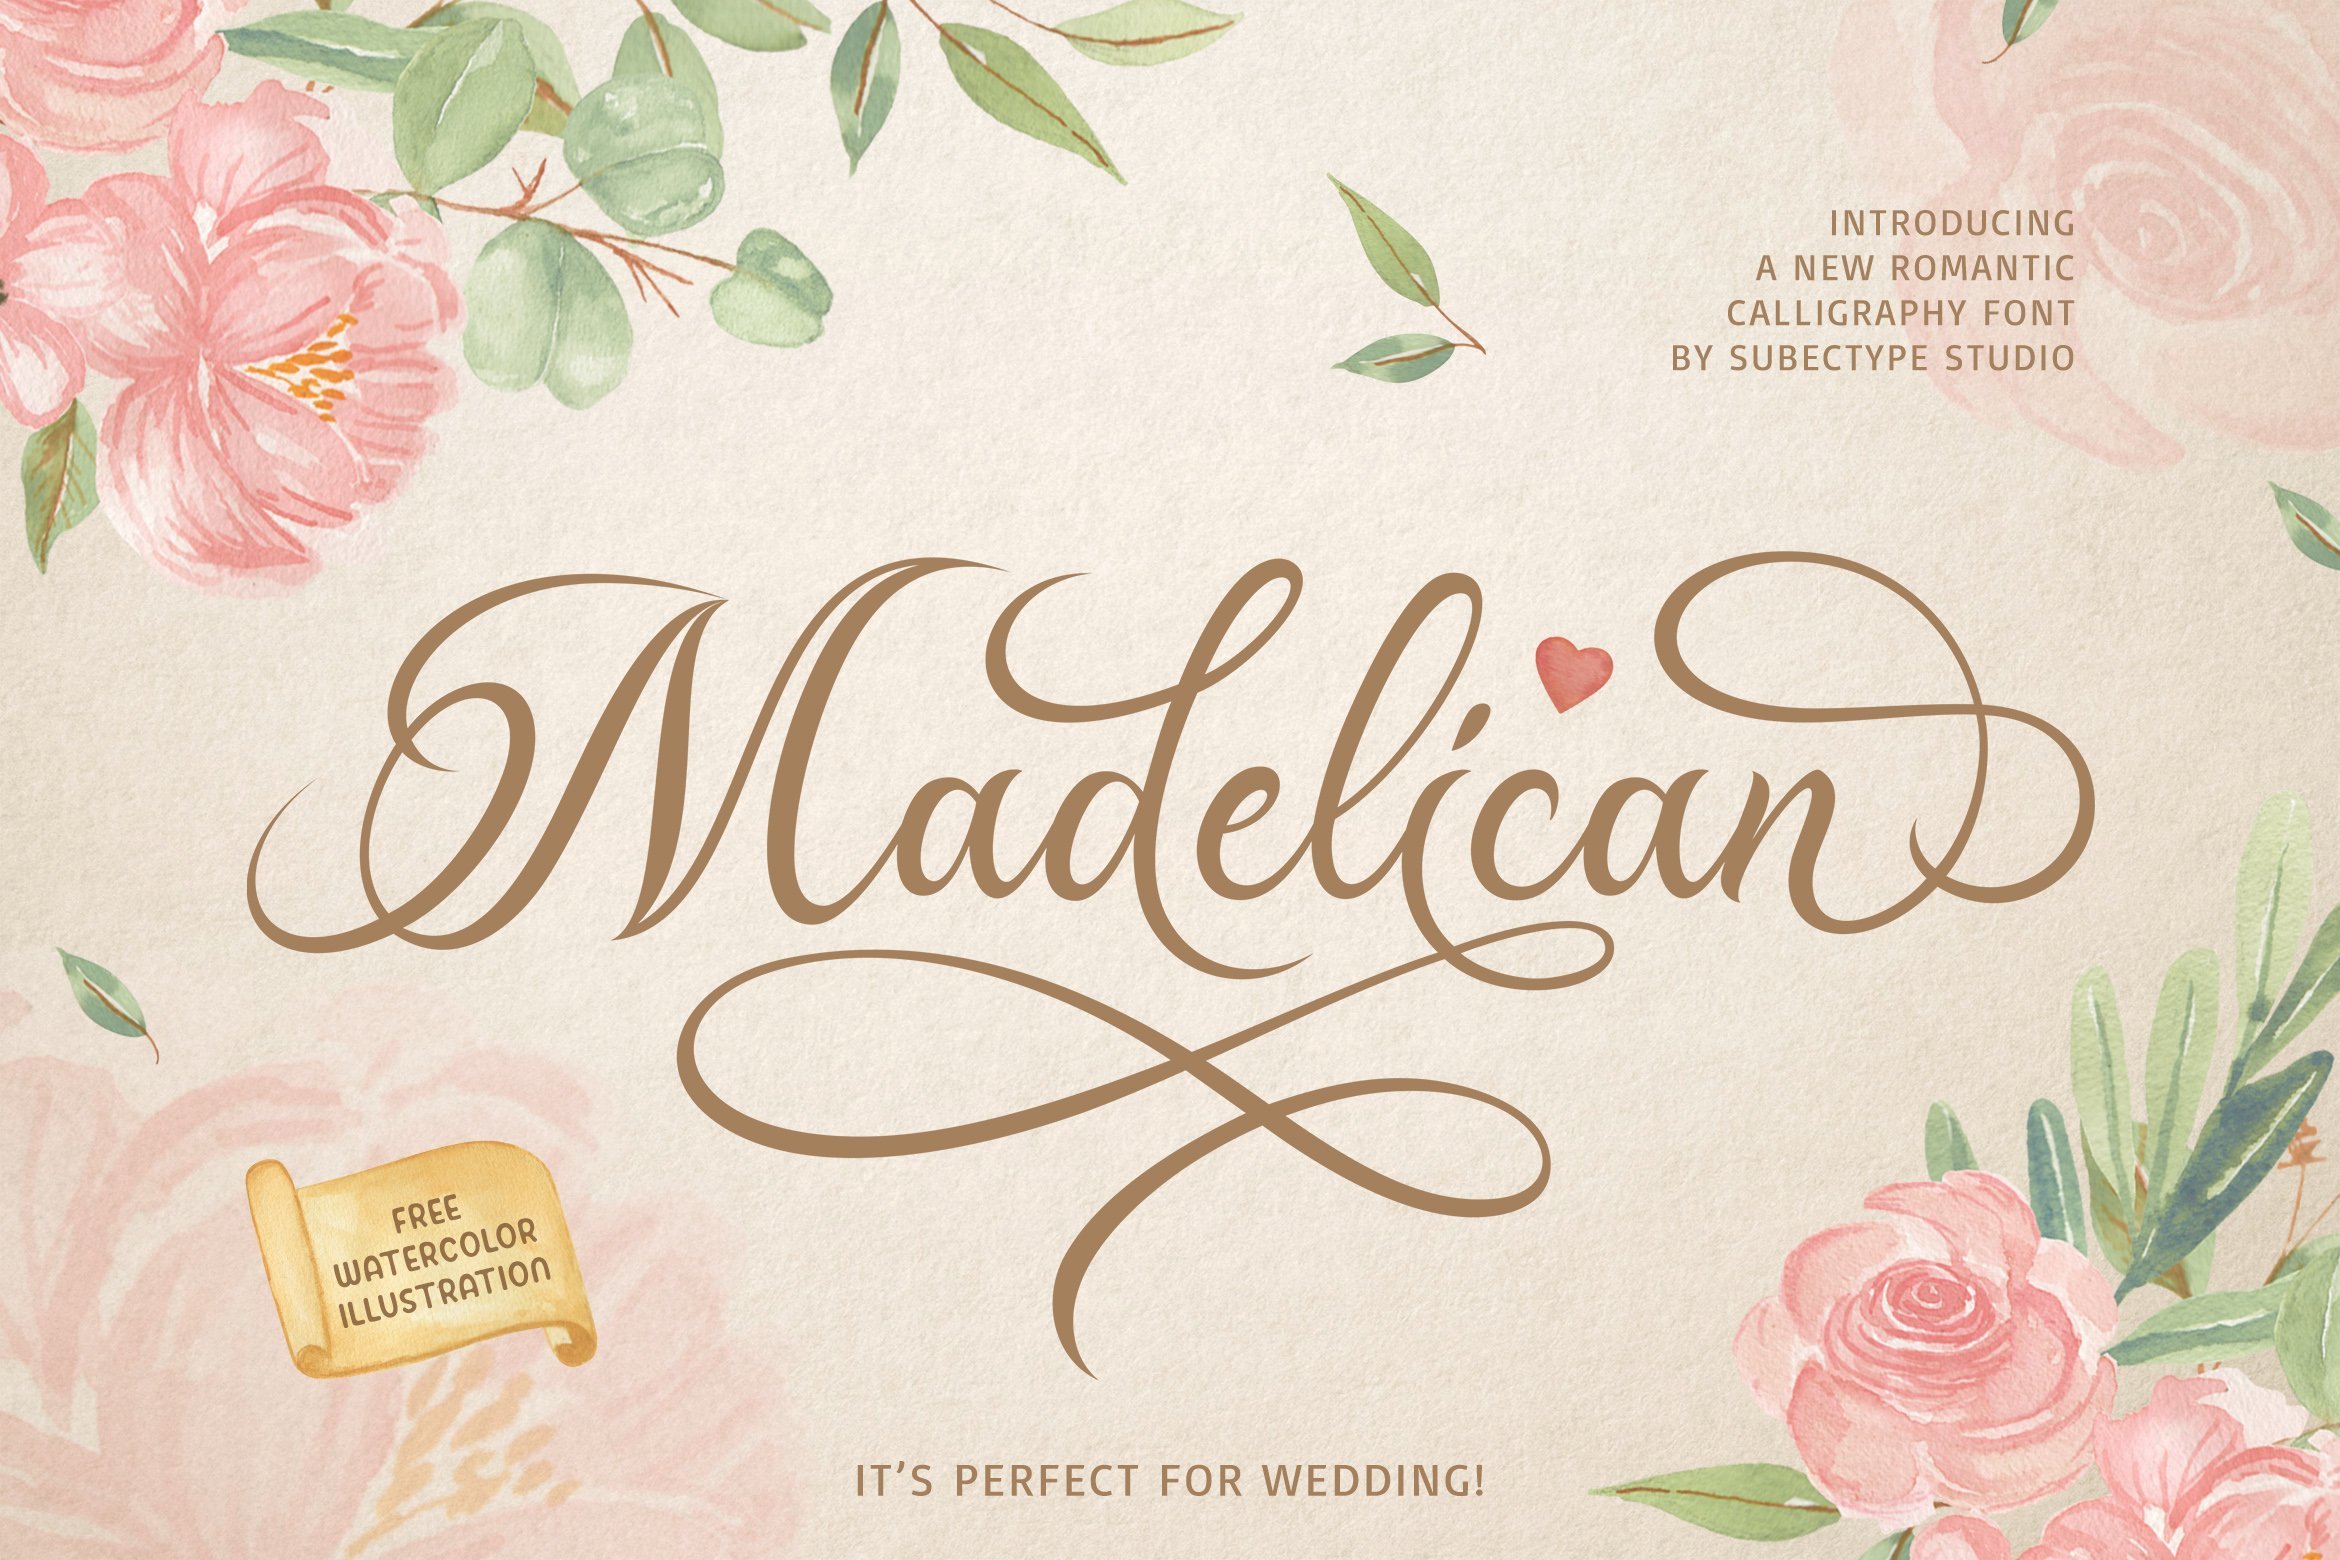 Madelican